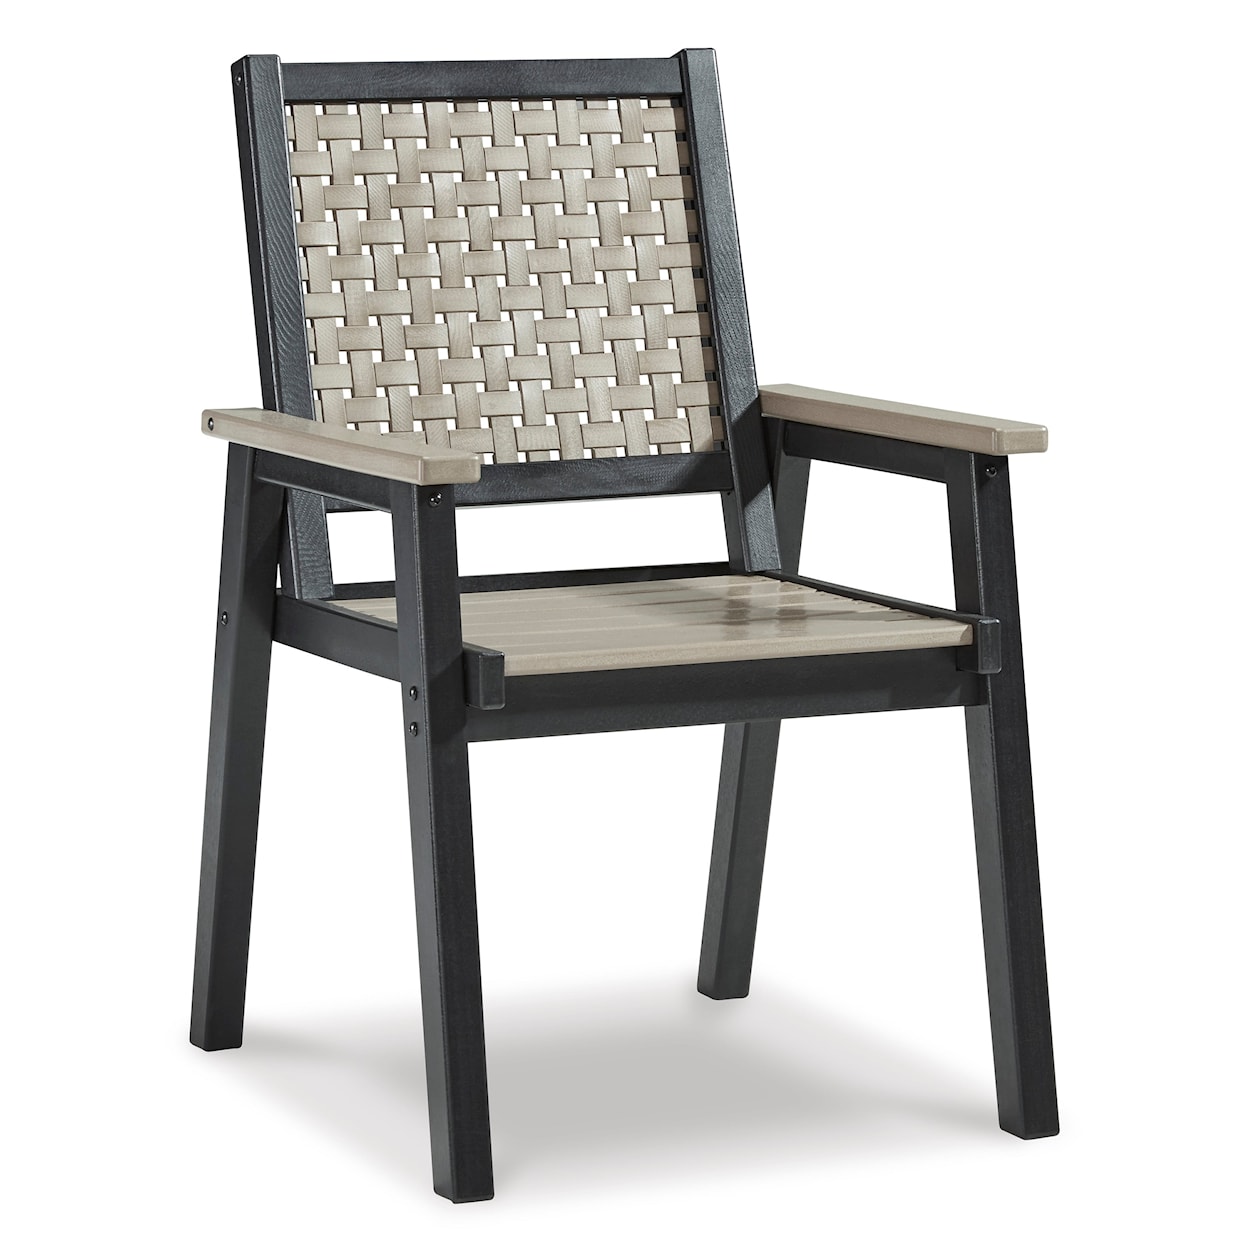 Signature Design by Ashley Mount Valley Contemporary Outdoor Dining Chair